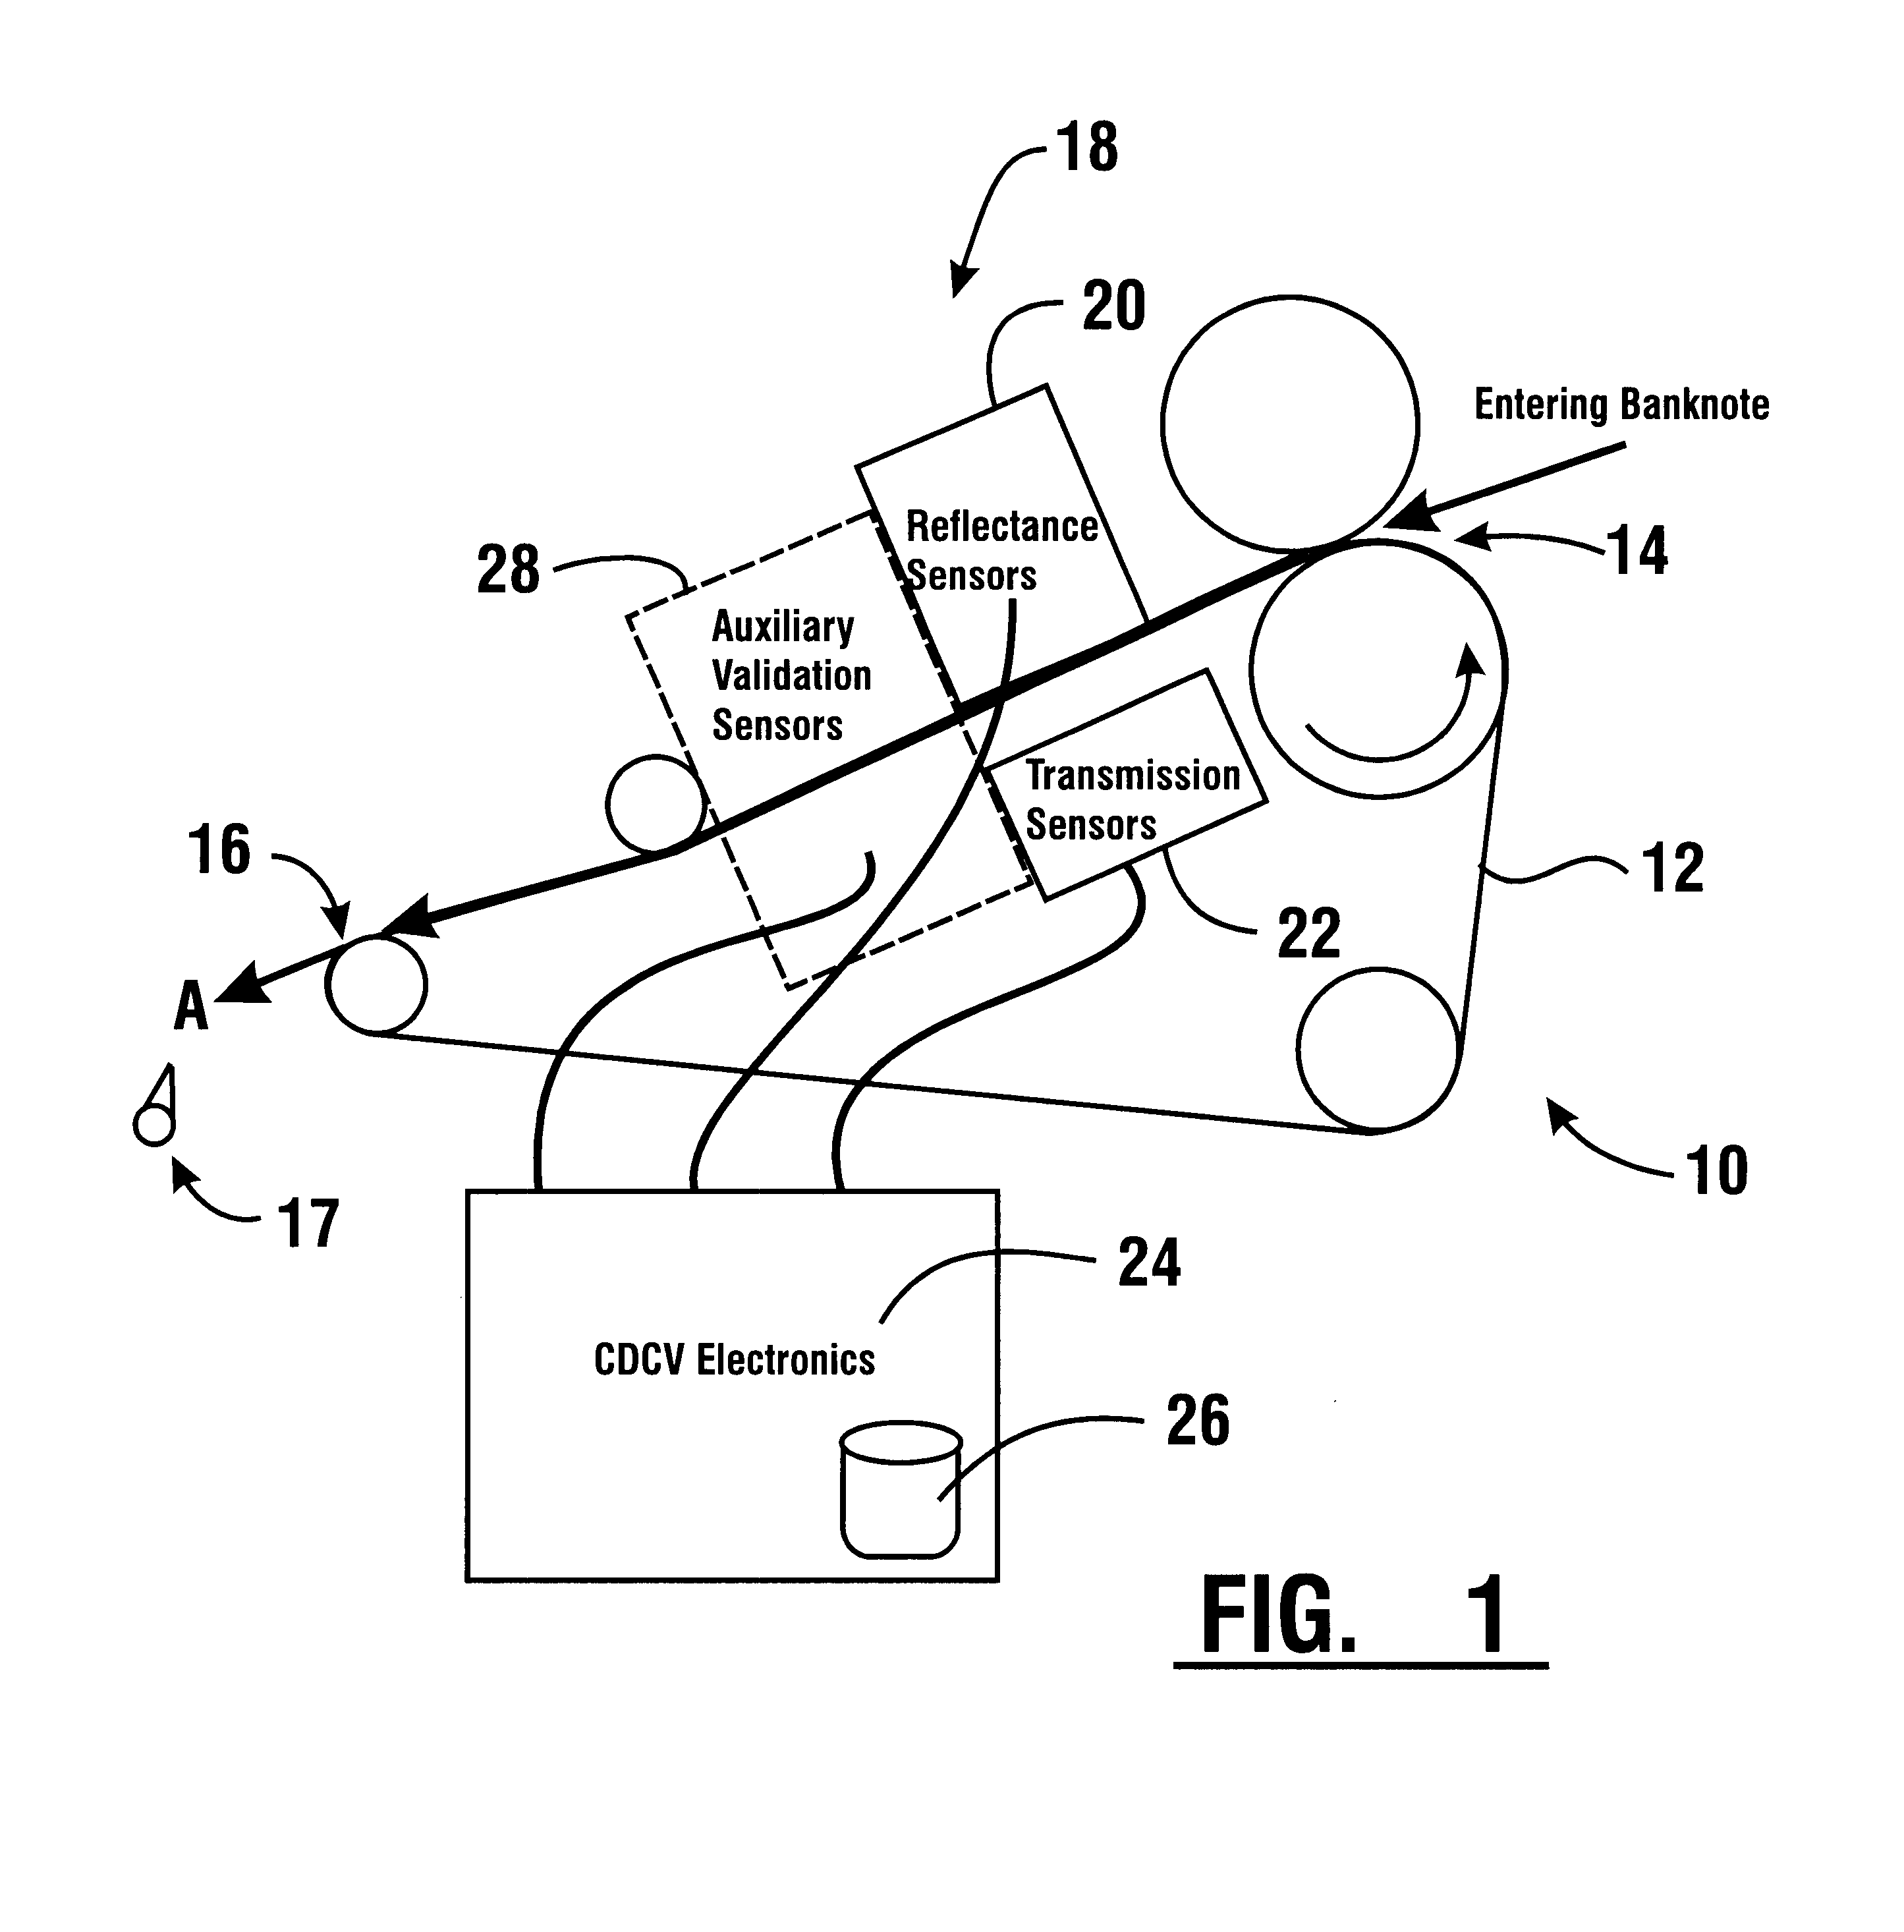 Apparatus and method for processing bank notes and other documents in an automated banking machine